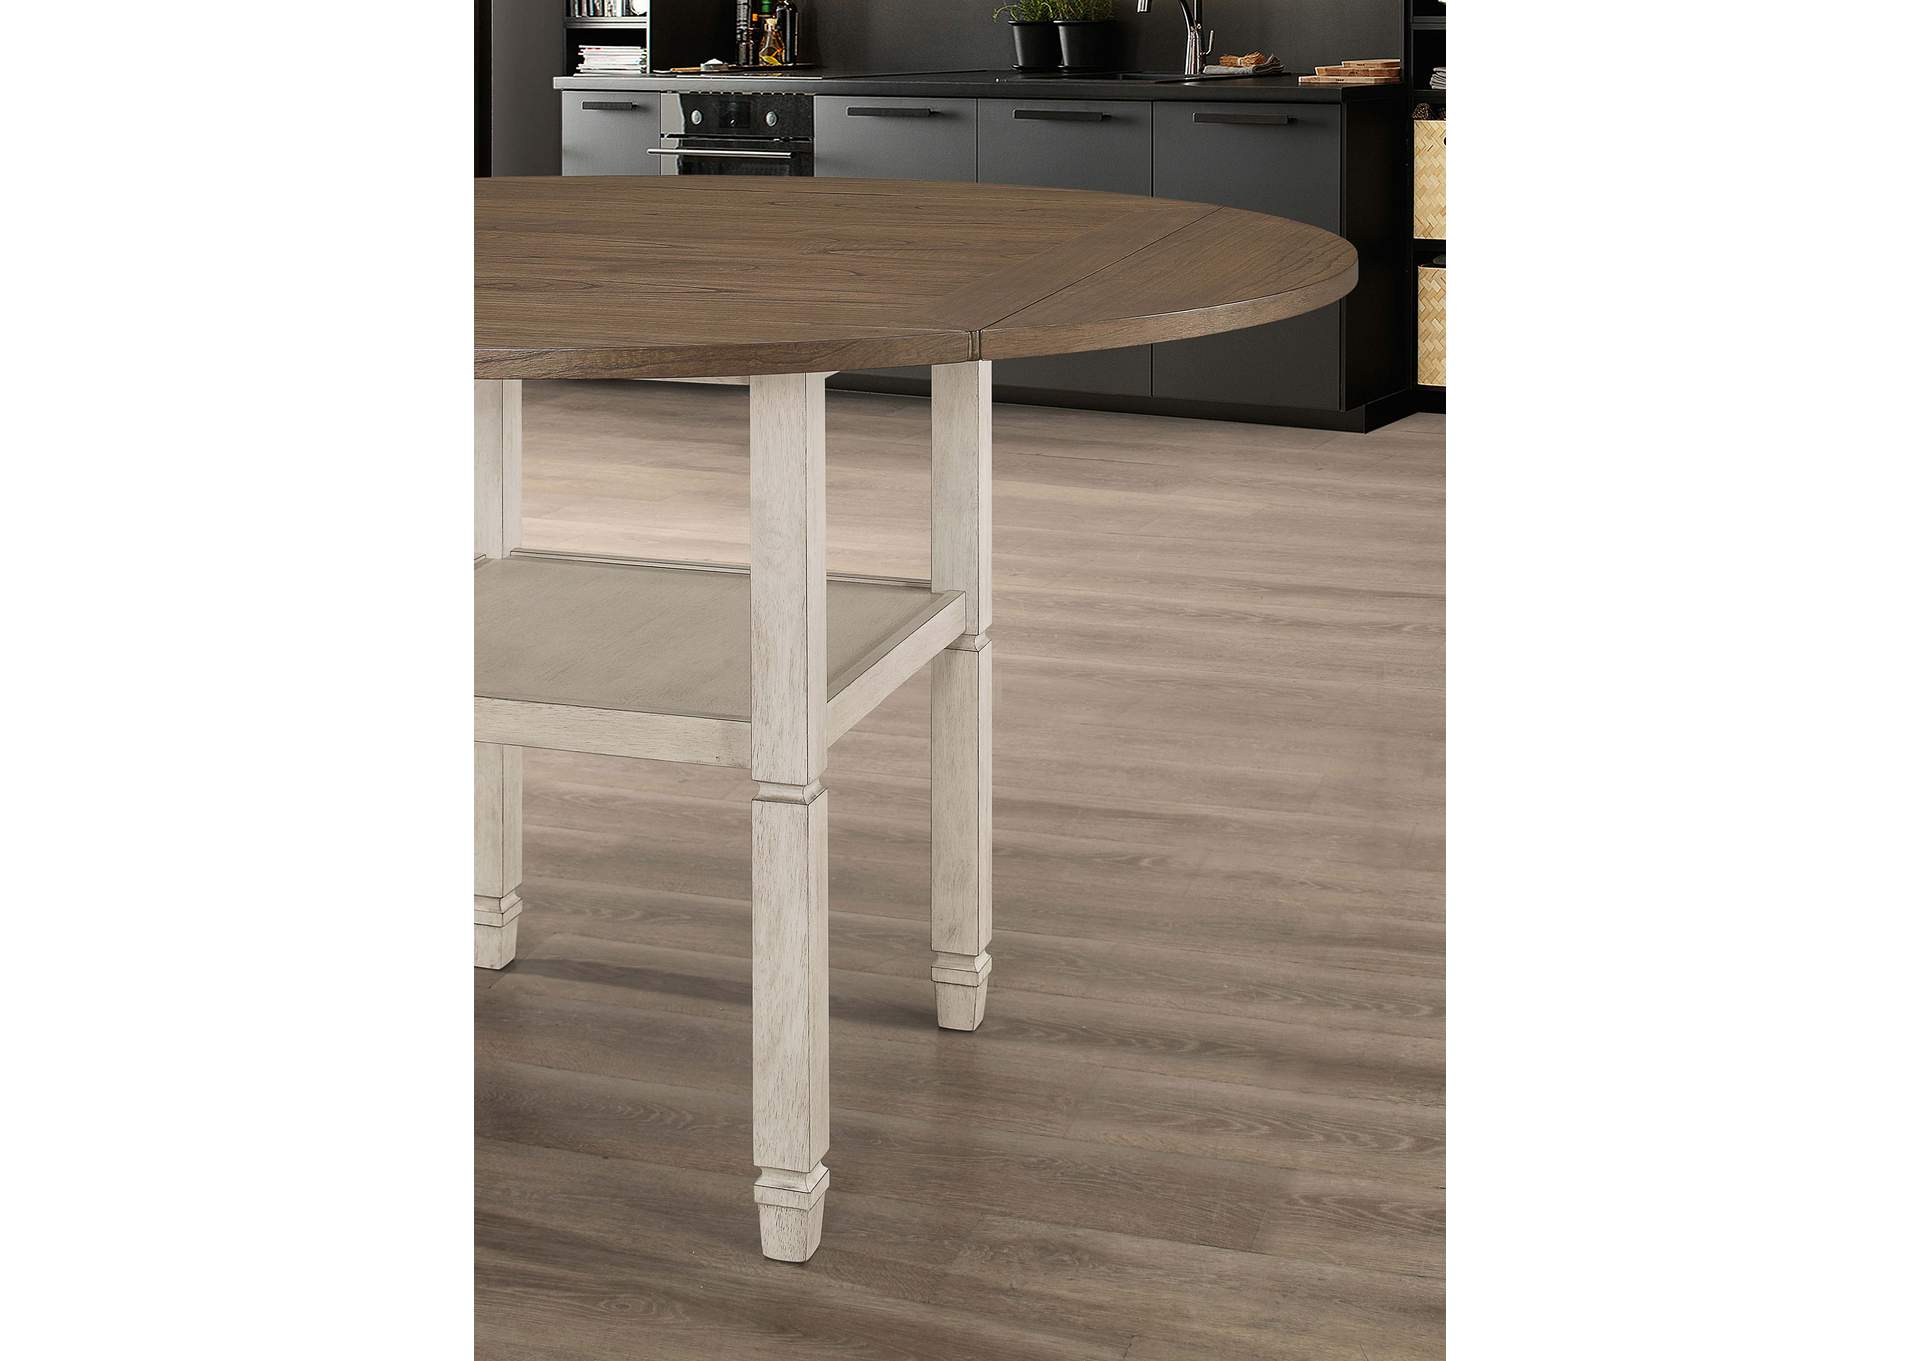 Sarasota Counter Height Table with Shelf Storage Nutmeg and Rustic Cream,Coaster Furniture